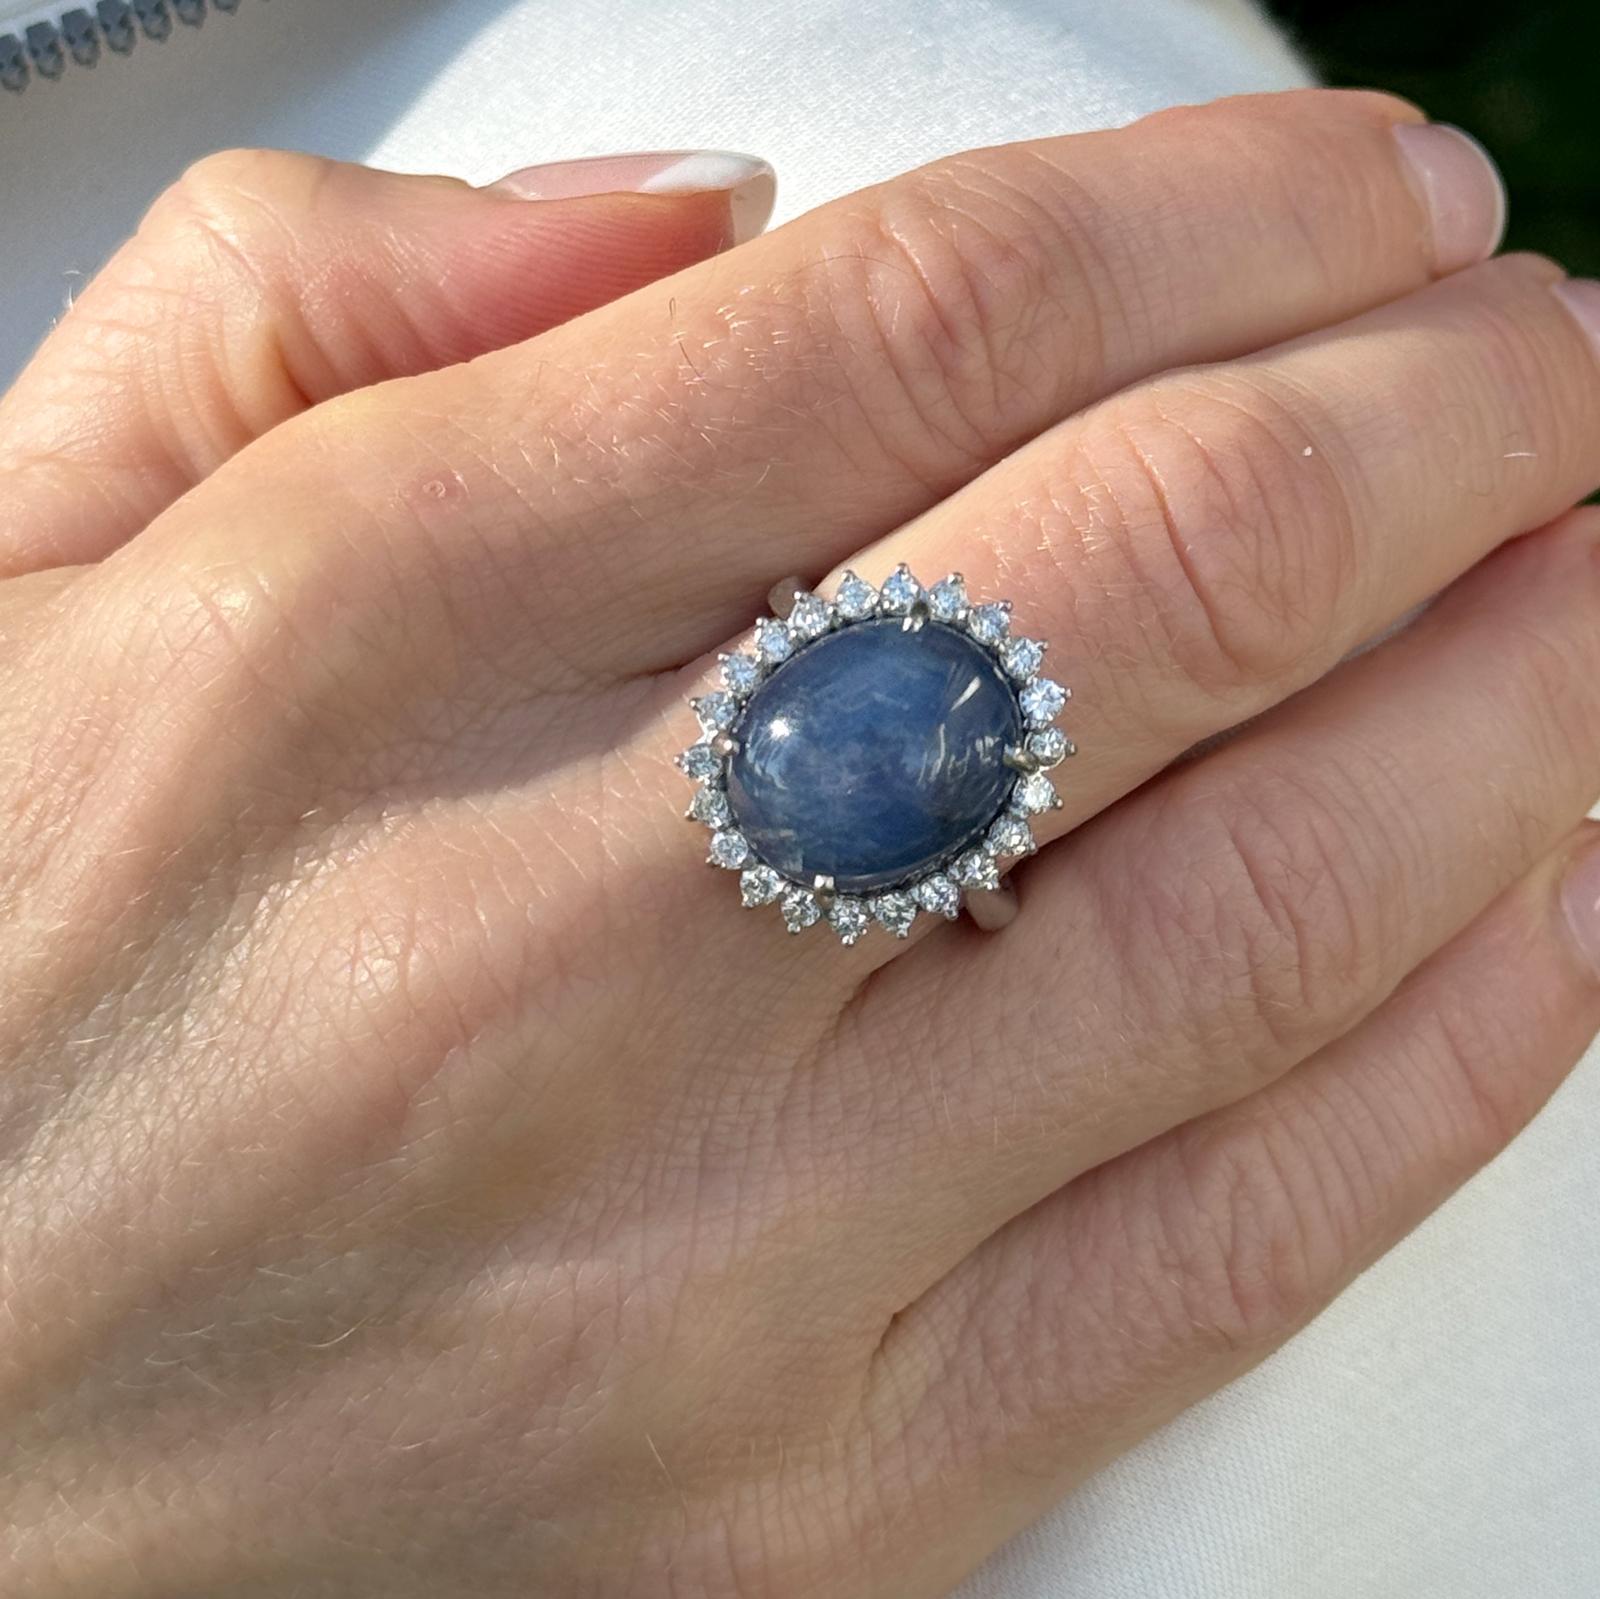 Vintage blue sapphire diamond cocktail ring crafted in 18 karat white gold. The cabochon natural blue sapphire weighs approximately 20 carats and is surrounded by 22 round brilliant cut diamonds weighing approximately .66 CTW. The diamonds are